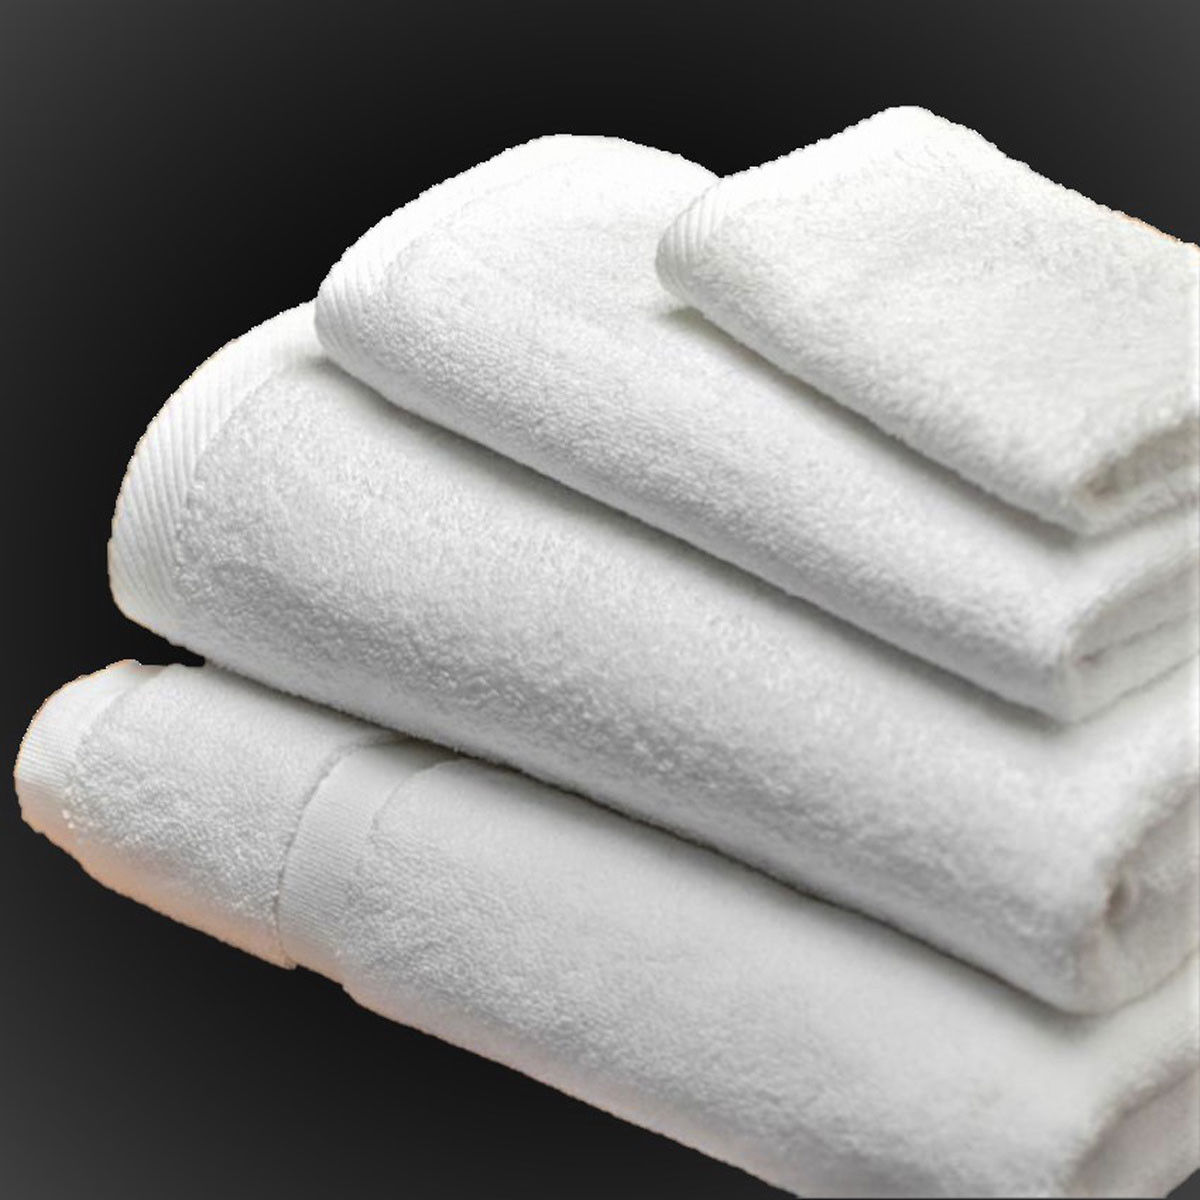 What fabric is used for bulk bath towels wholesale?